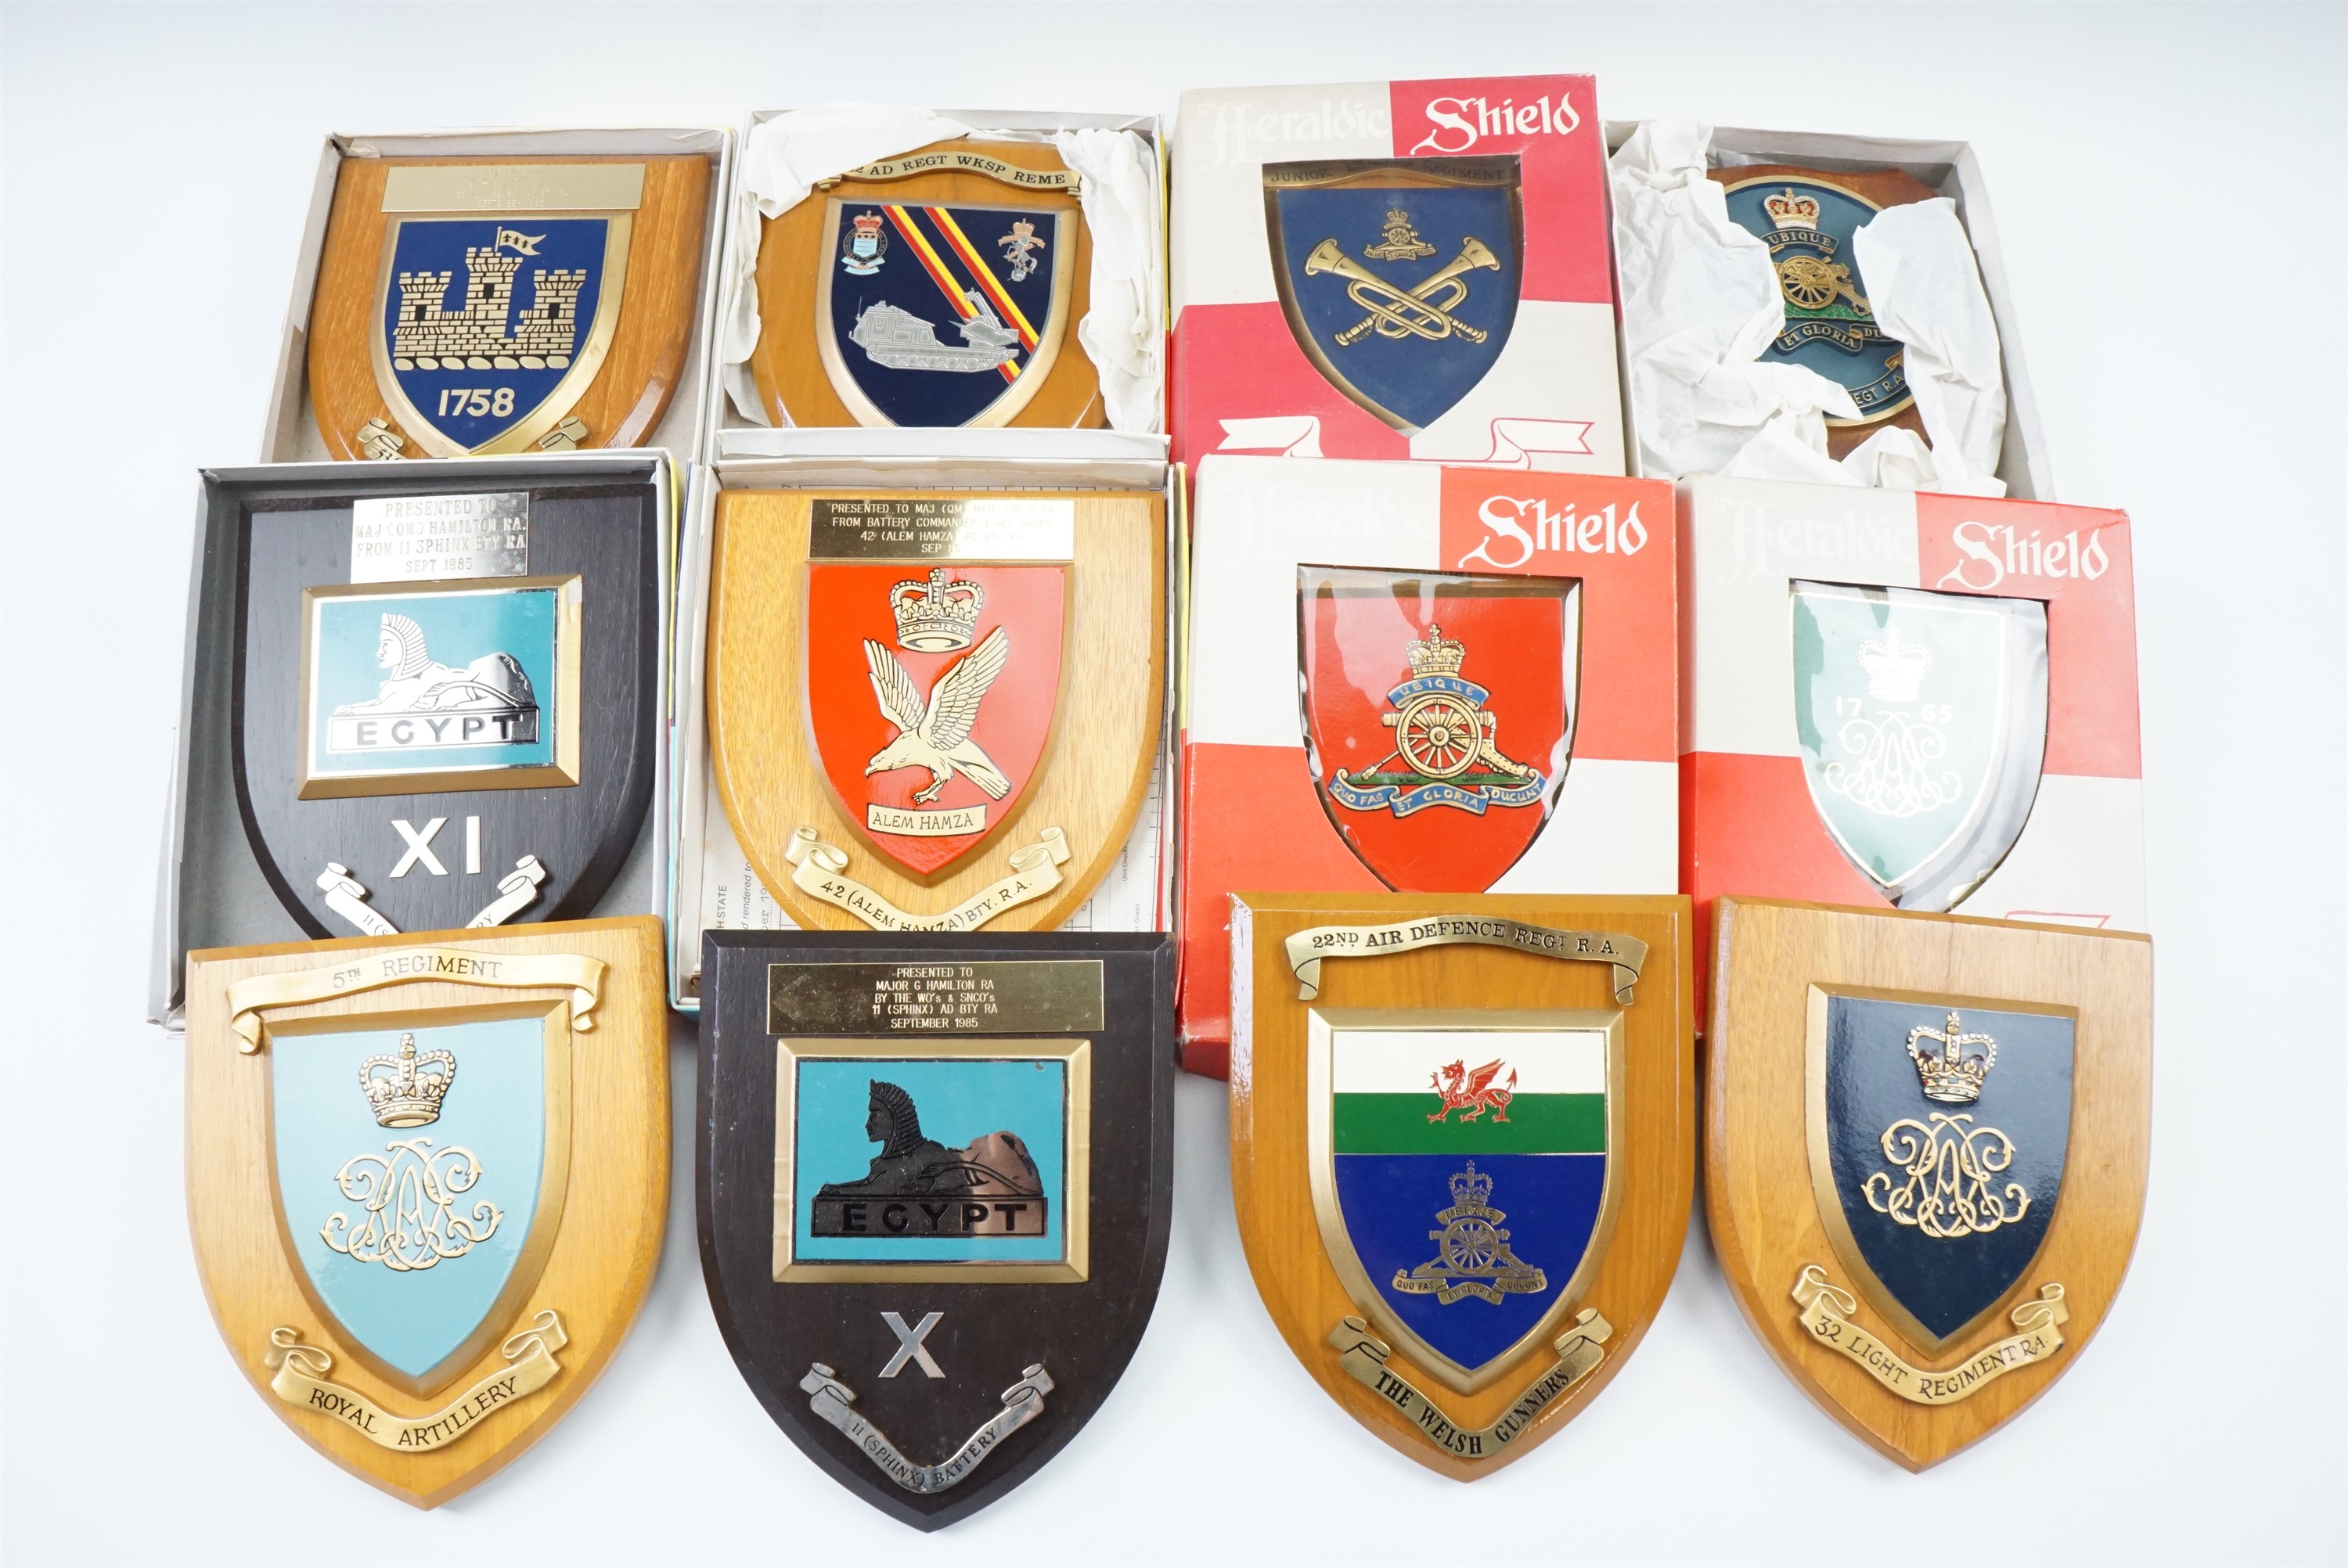 A quantity of military shield-shaped plaques, many in original cartons